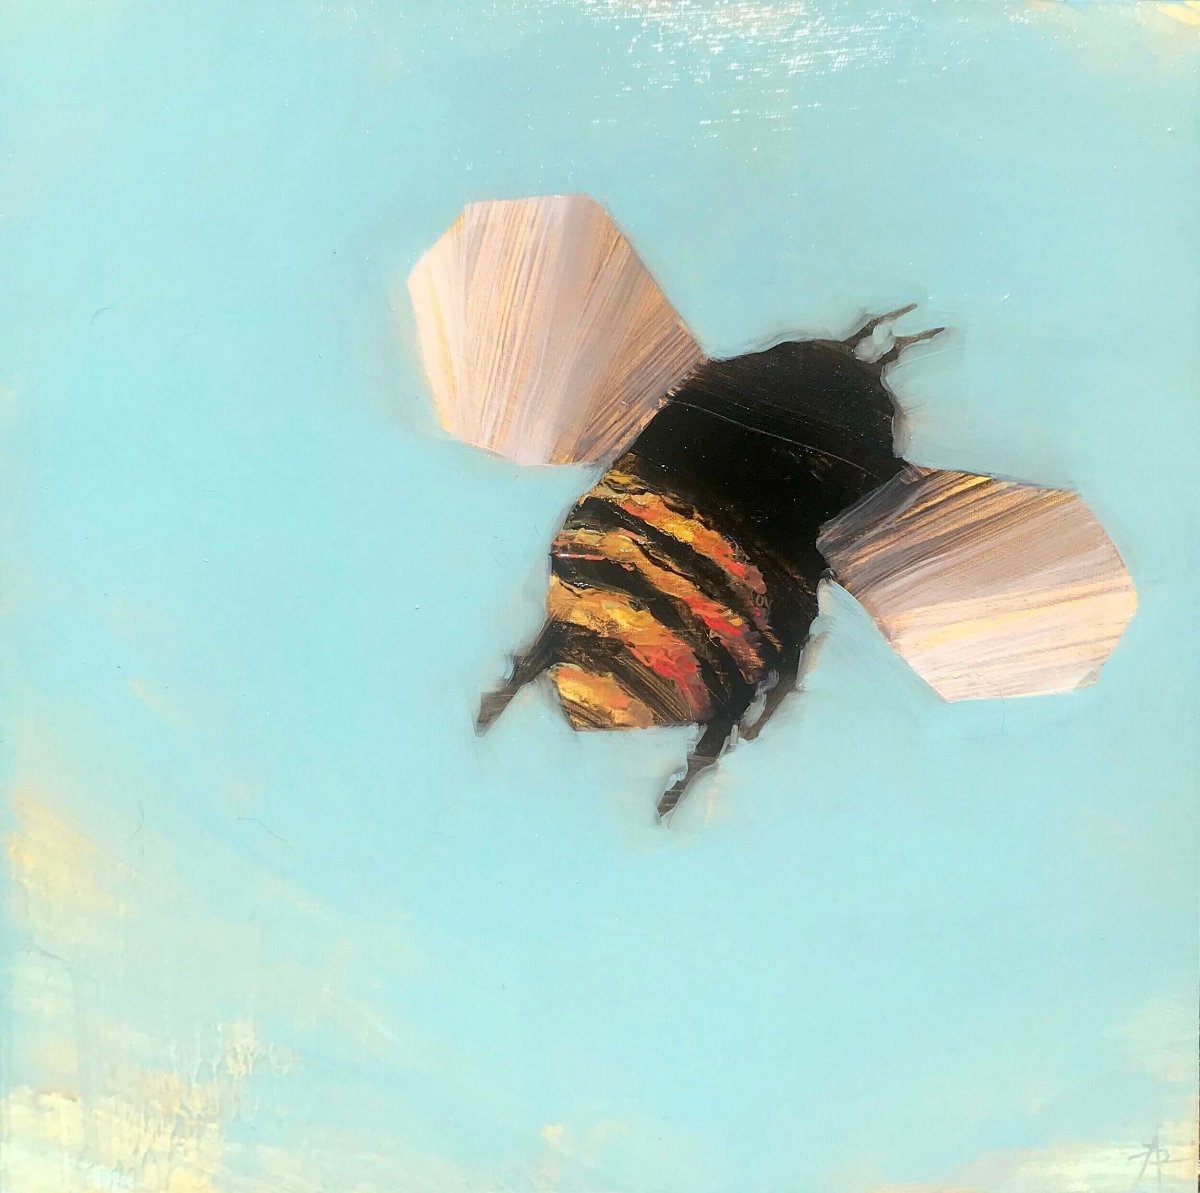 Bees 2-24 by Angie Renfro at LePrince Galleries